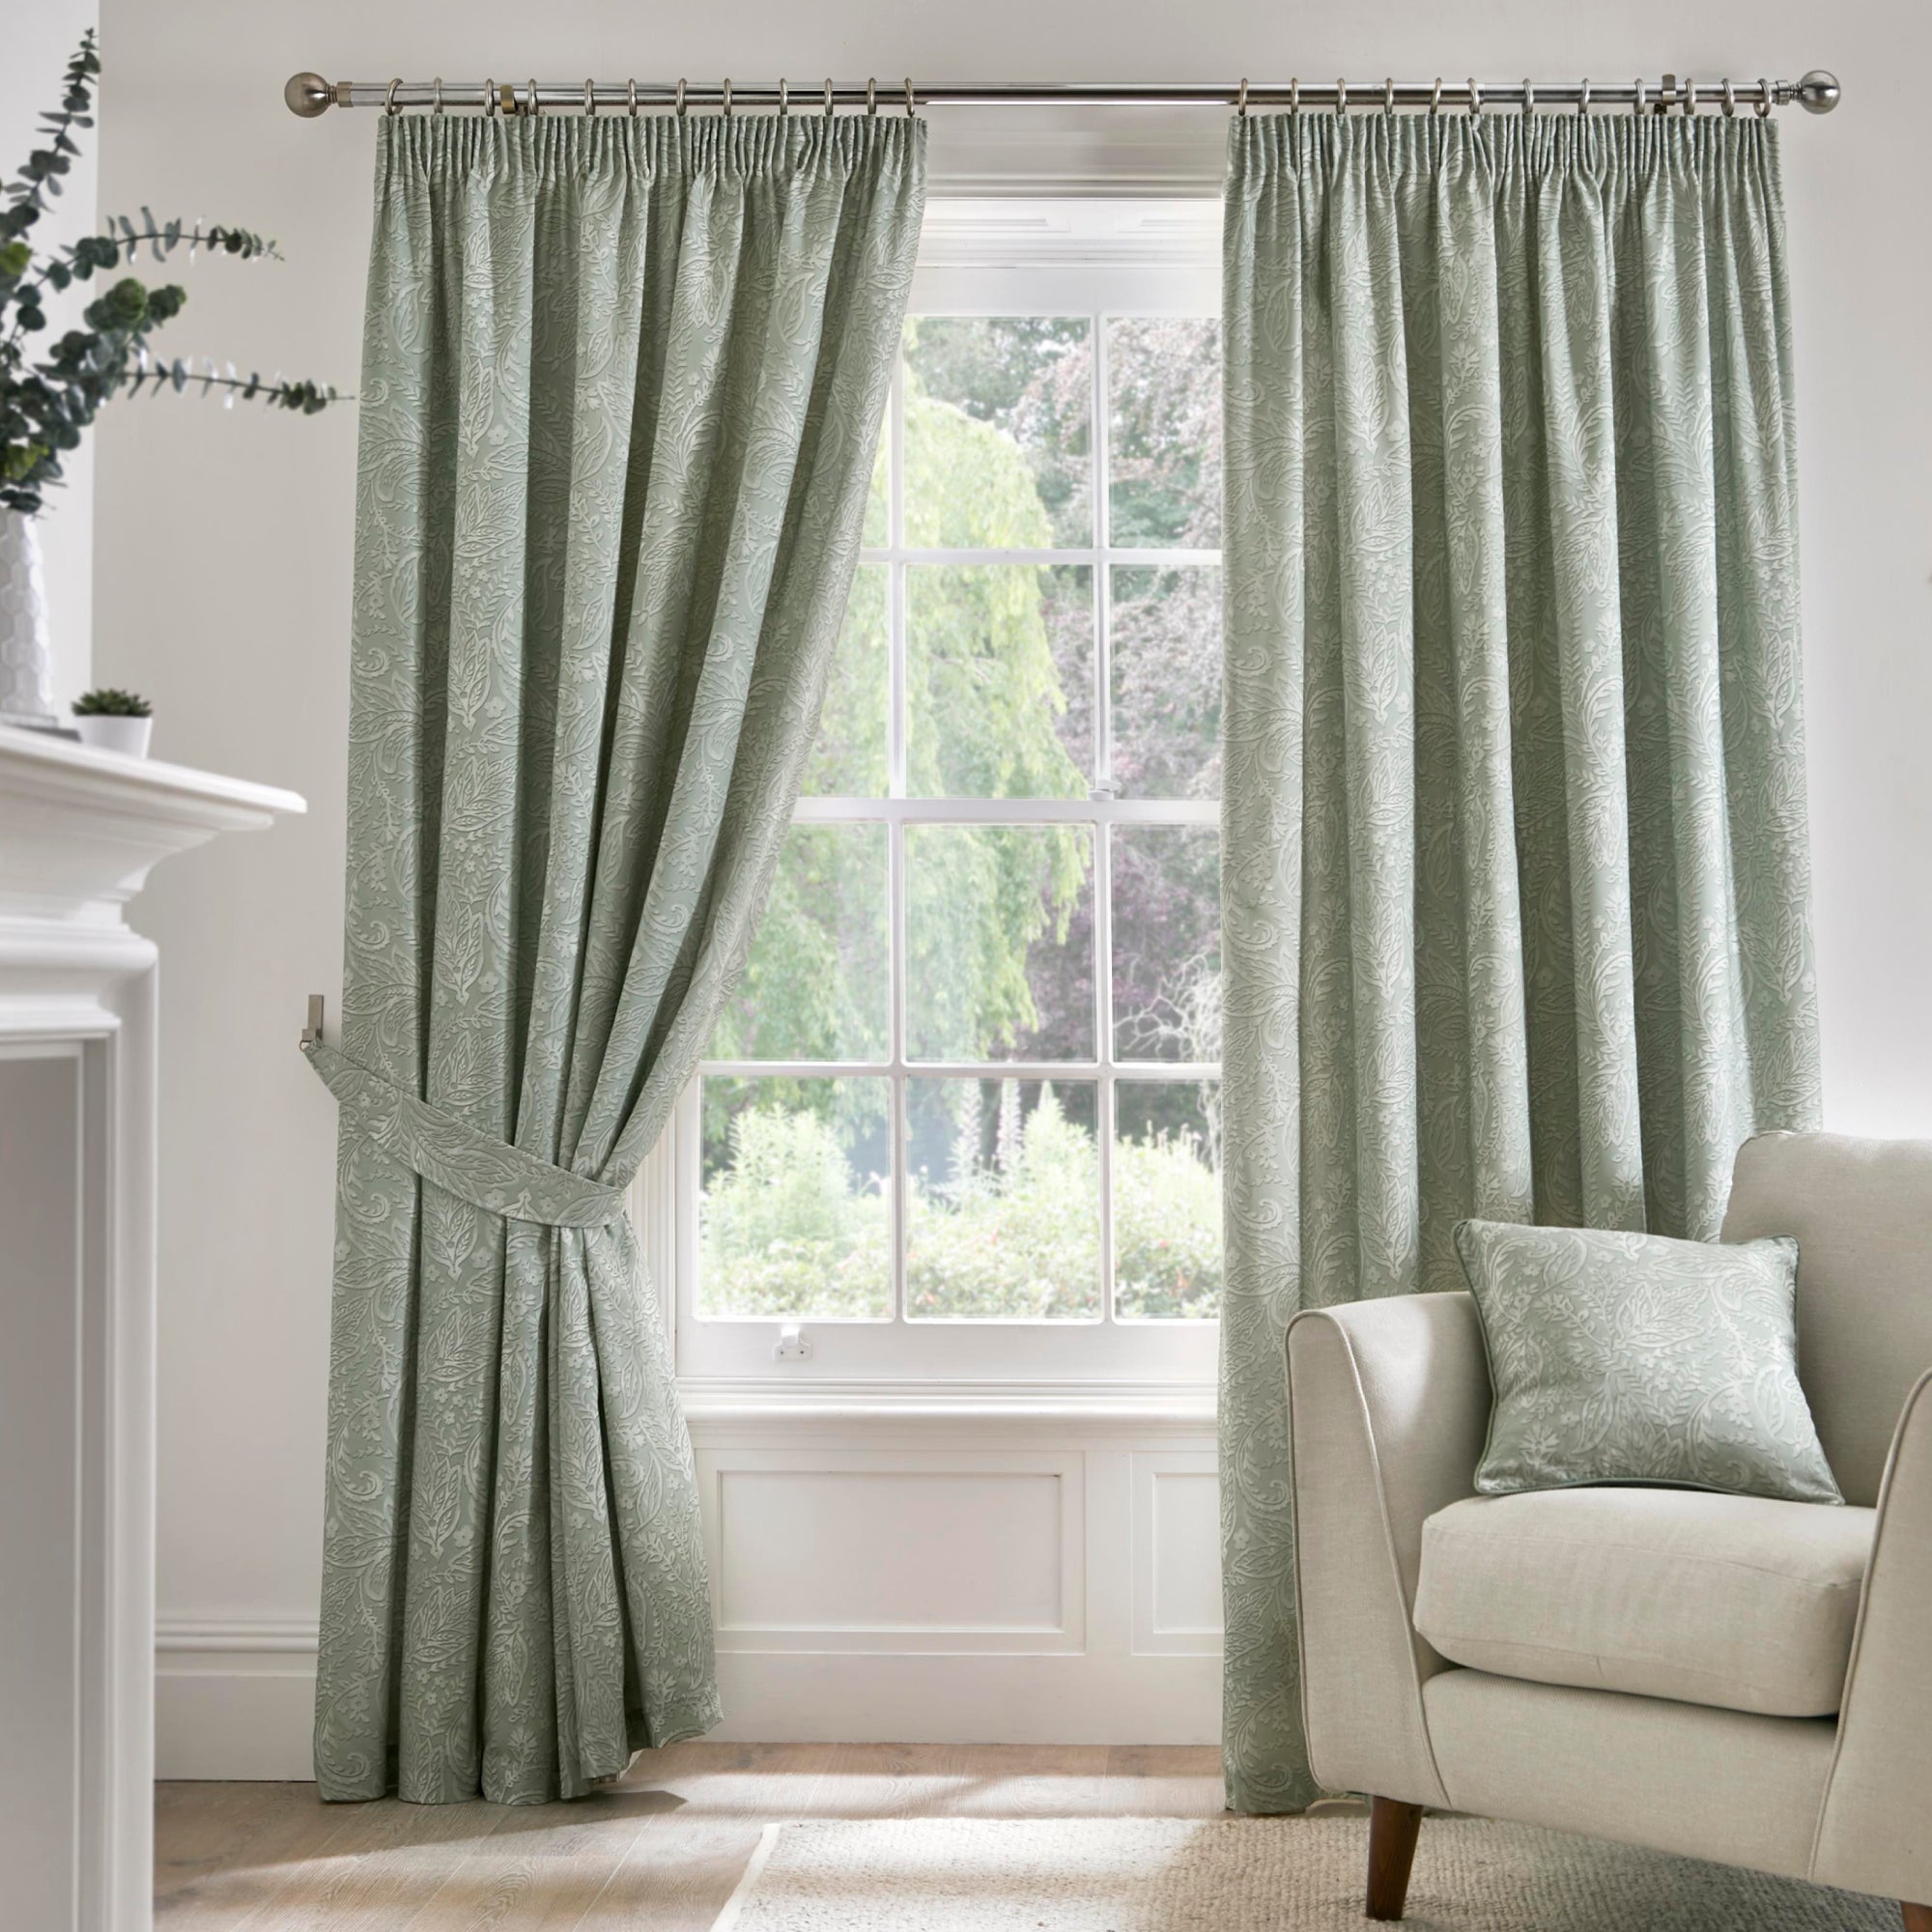 Pair of Pencil Pleat Curtains With Tie-Backs Aveline by D&D in Green